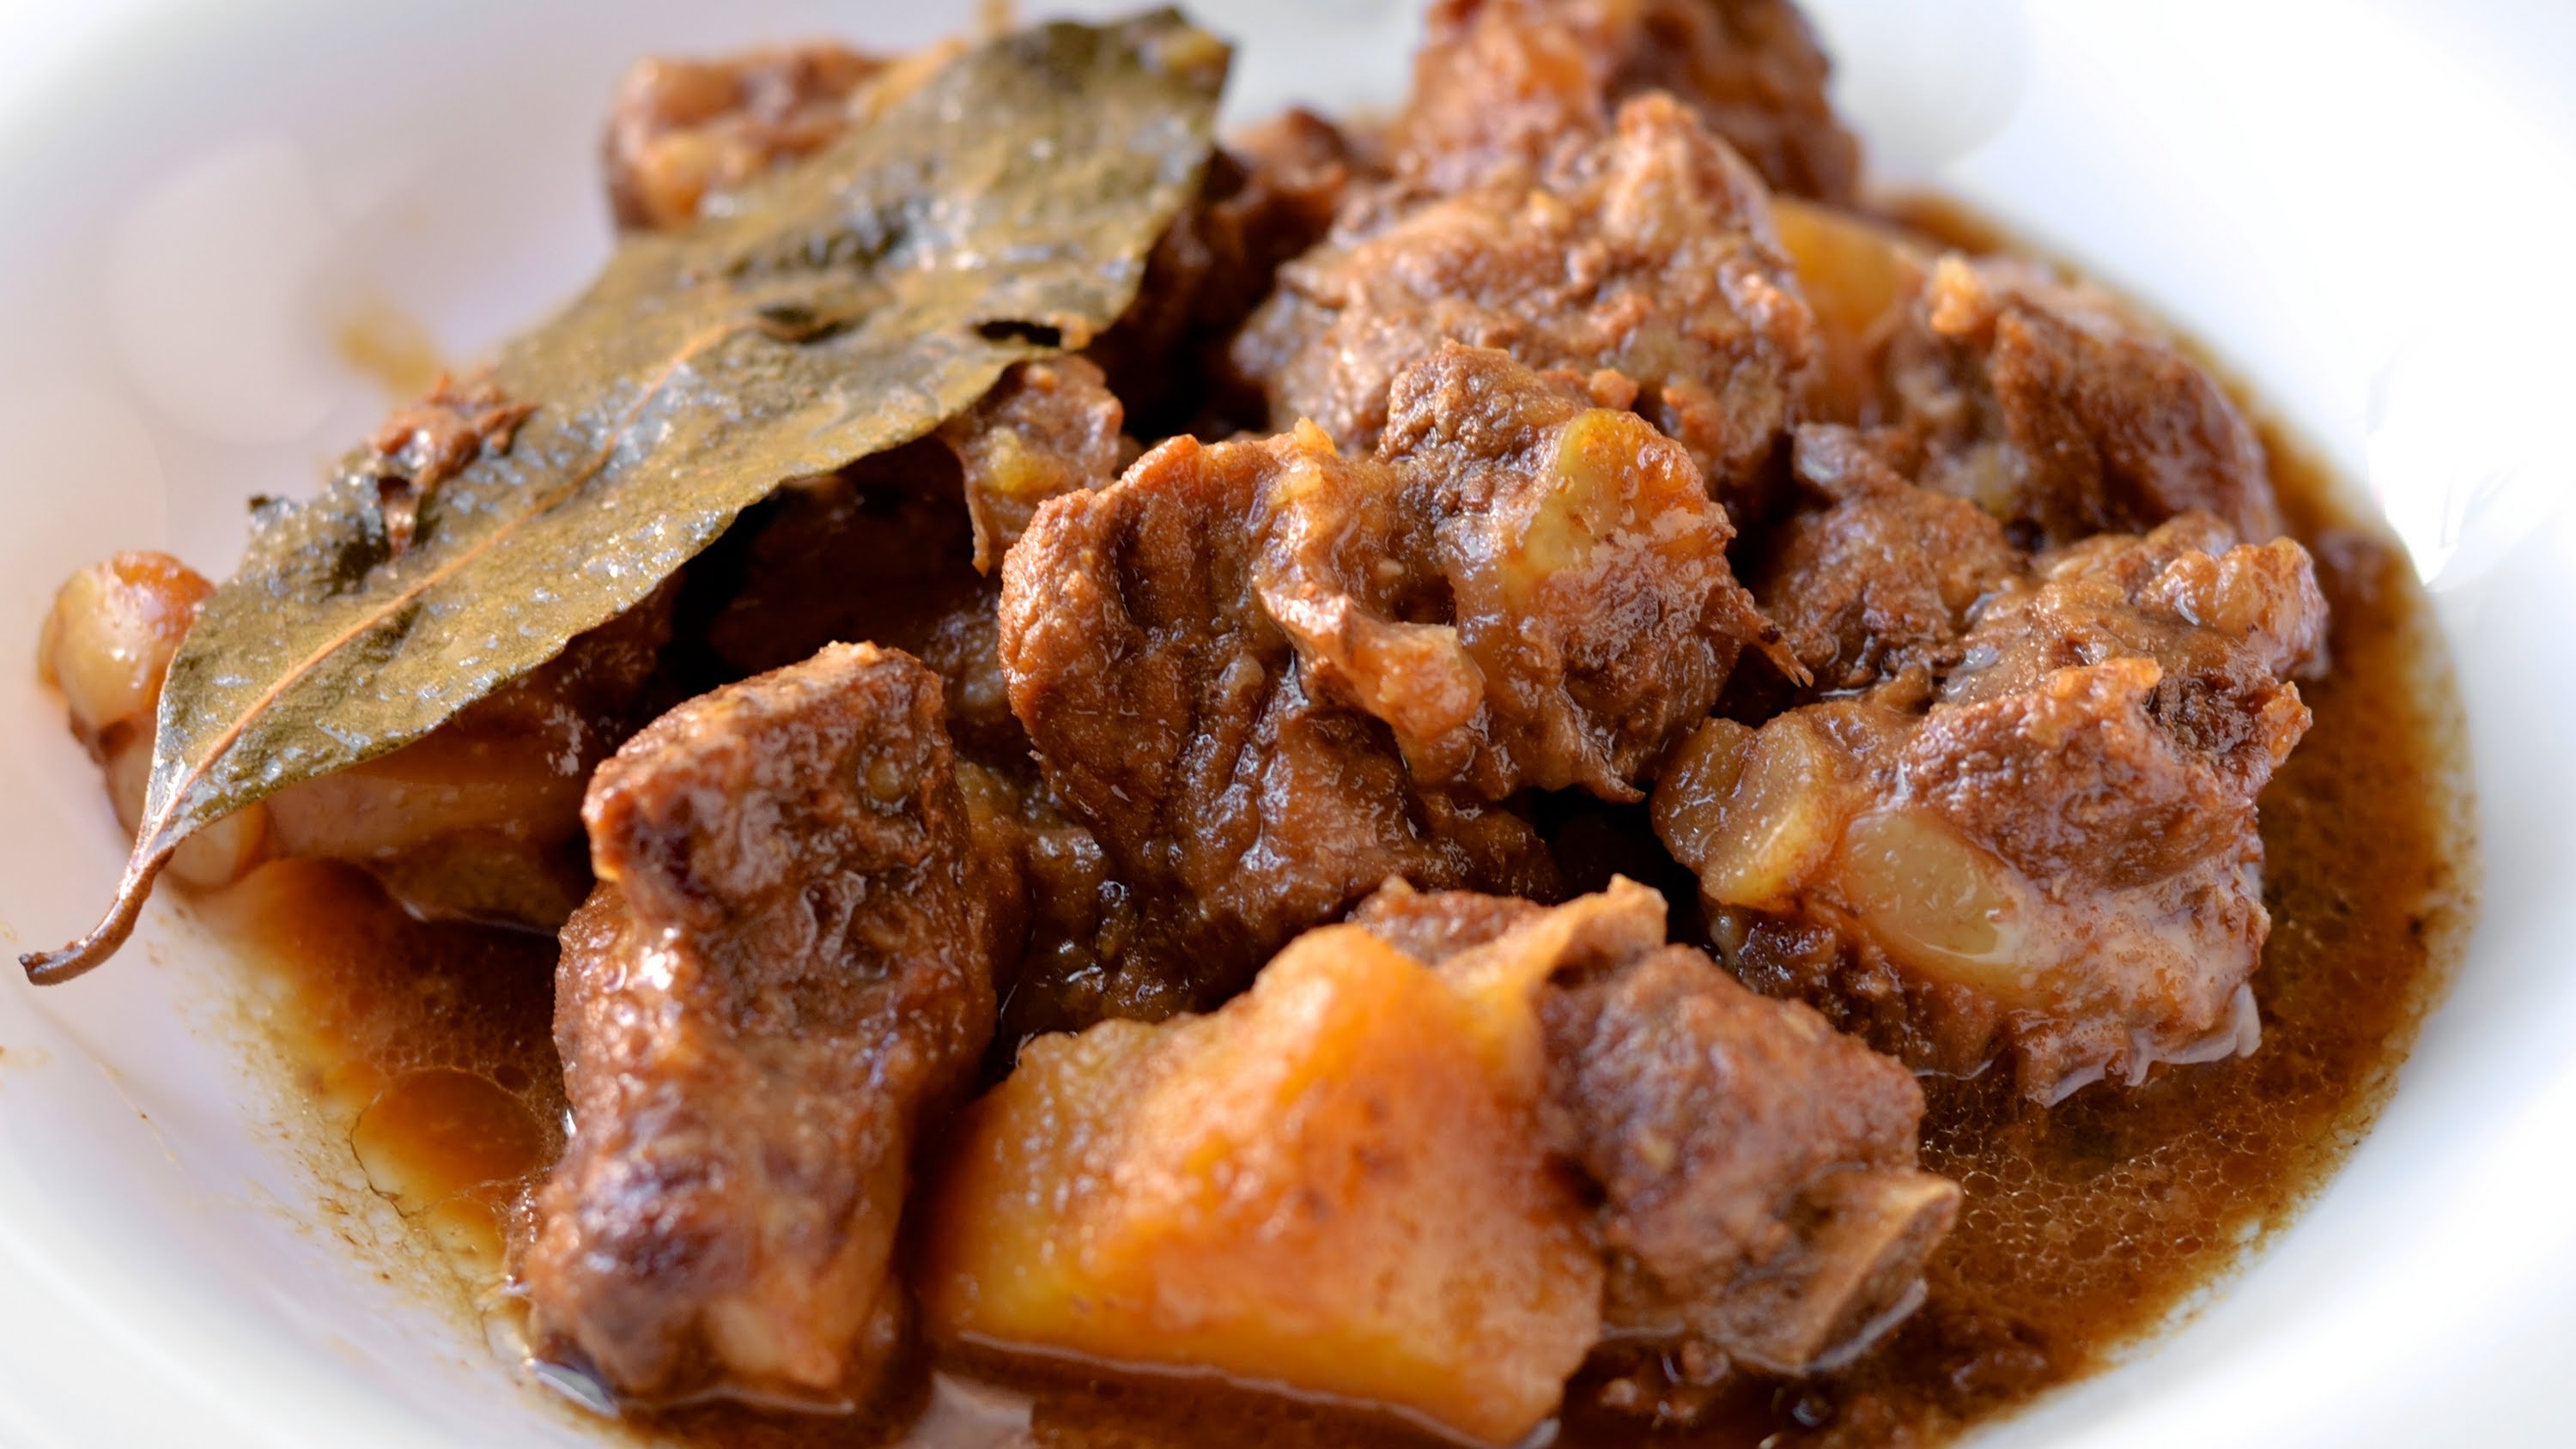 Don't make the mistake of skipping adobo when in the Philippines. Pic: Ulam Pinoy/YouTube